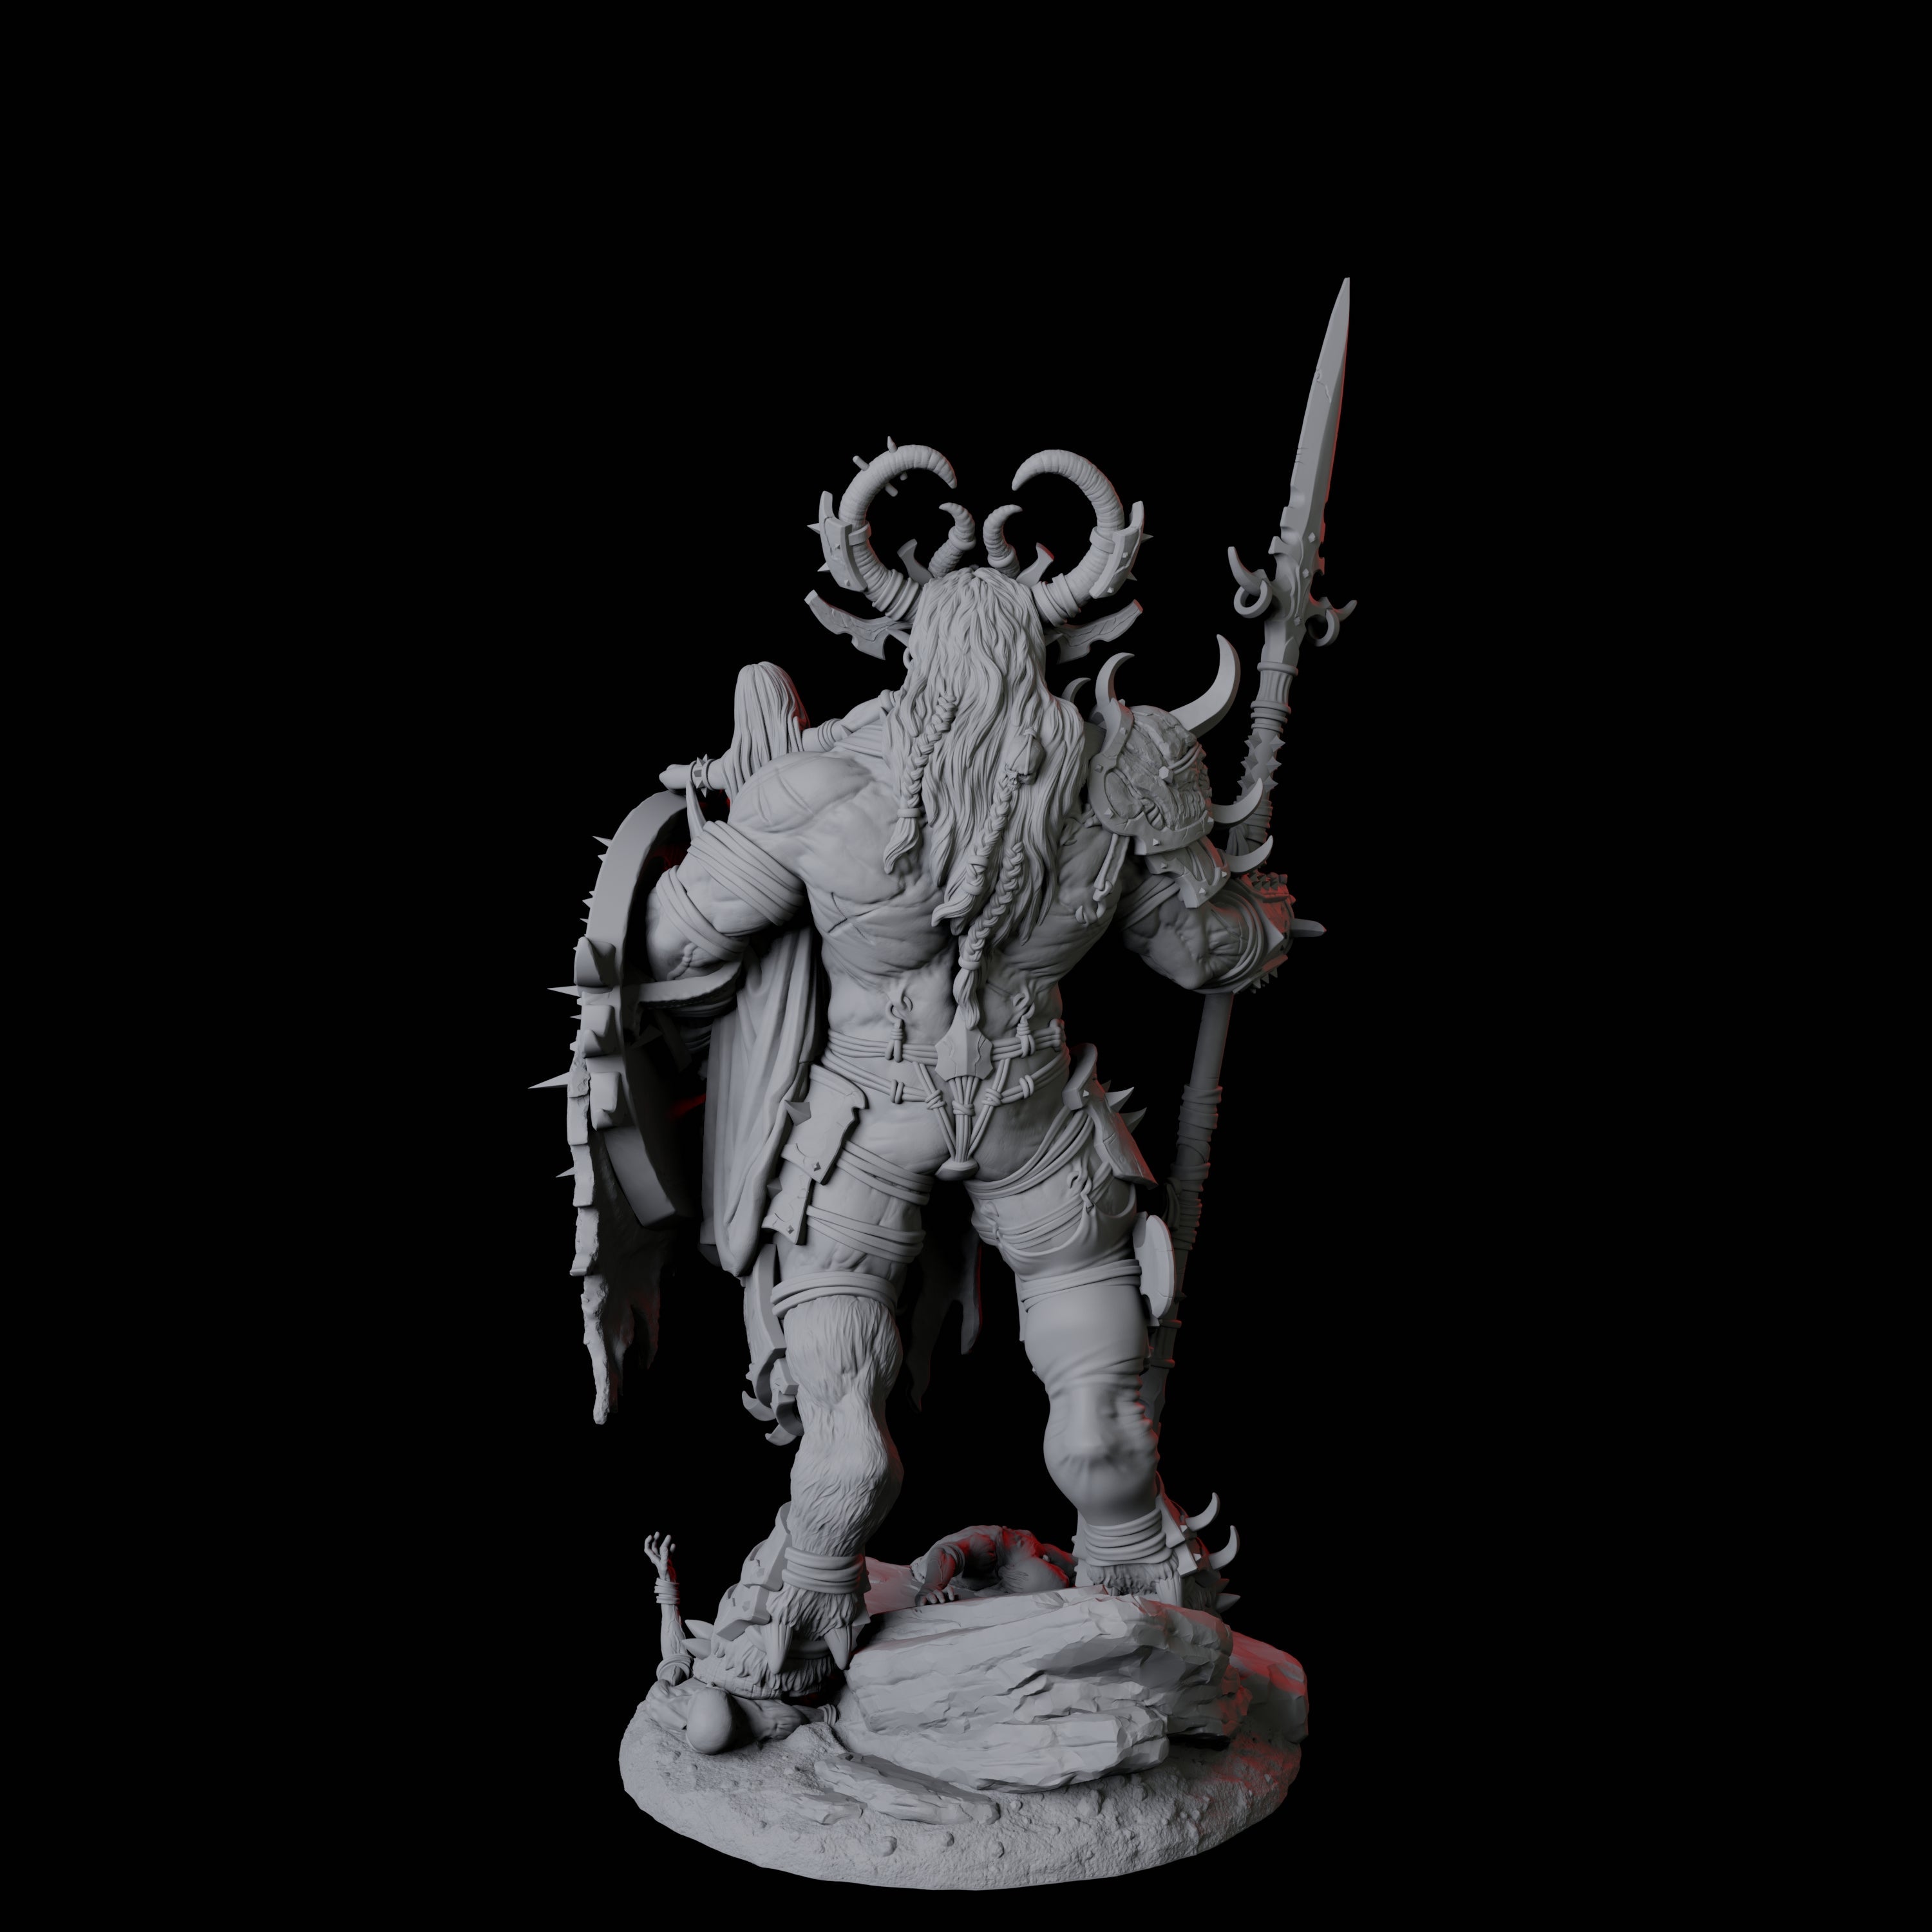 Seduced Bearded Devil Champion B Miniature for Dungeons and Dragons, Pathfinder or other TTRPGs